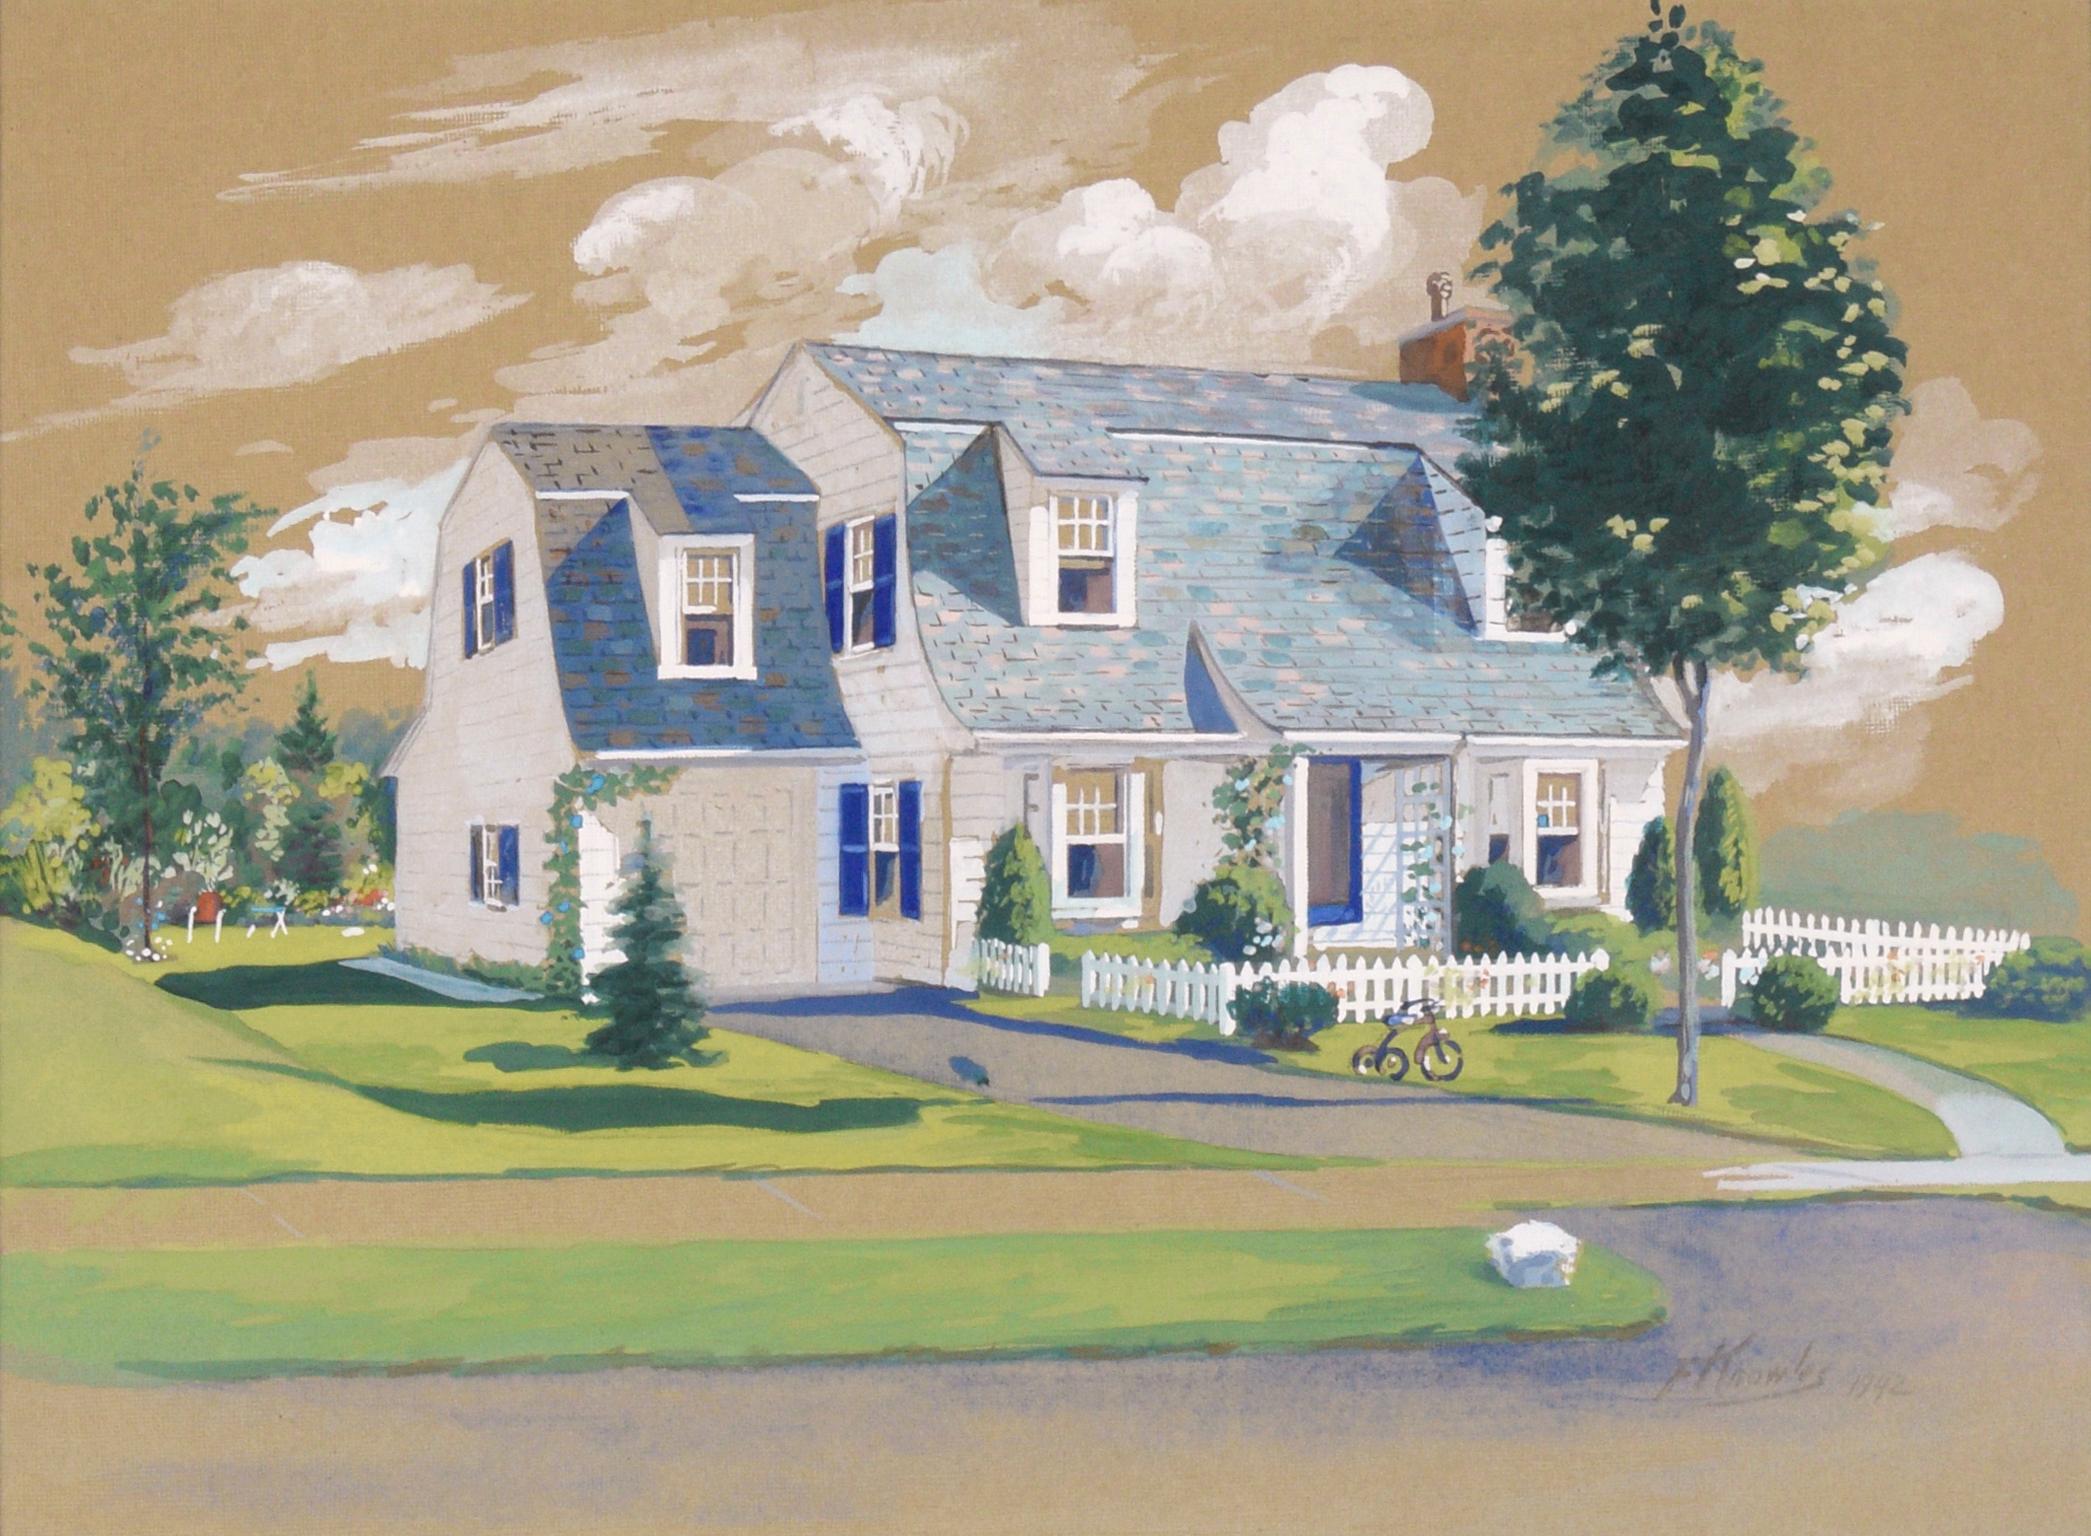 Architectural Illustration of Cape Cod Style Barn House with Dormers in Gouache  - Art by F. Knowles